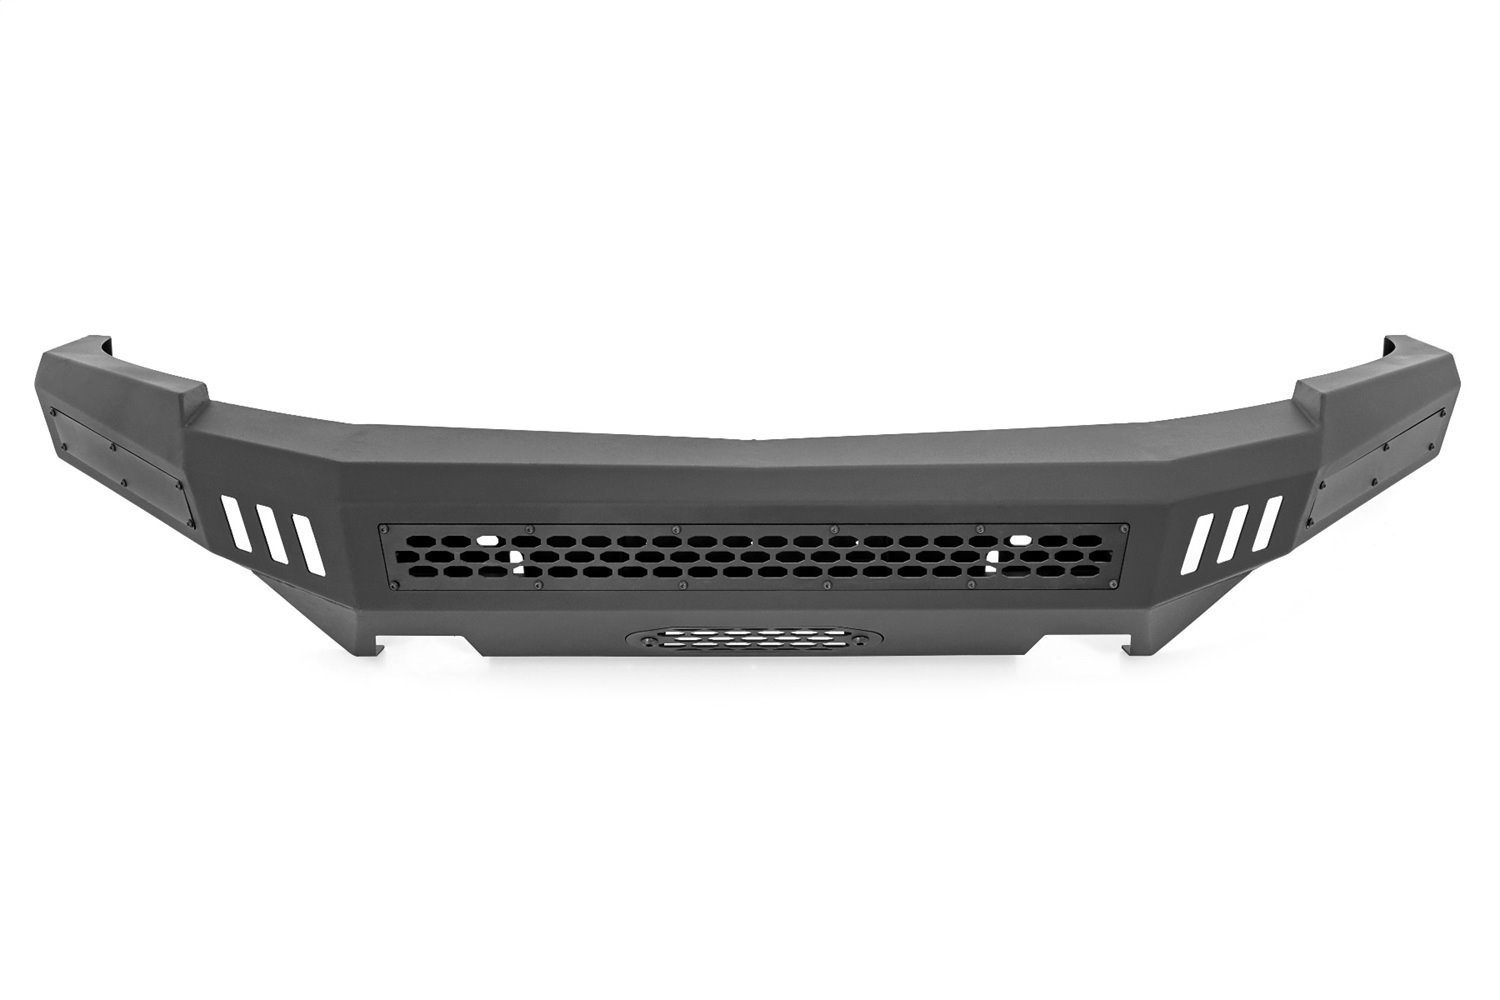 10910 Chevy Front High Clearance Bumper Kit (07-13 Silverado 1500)